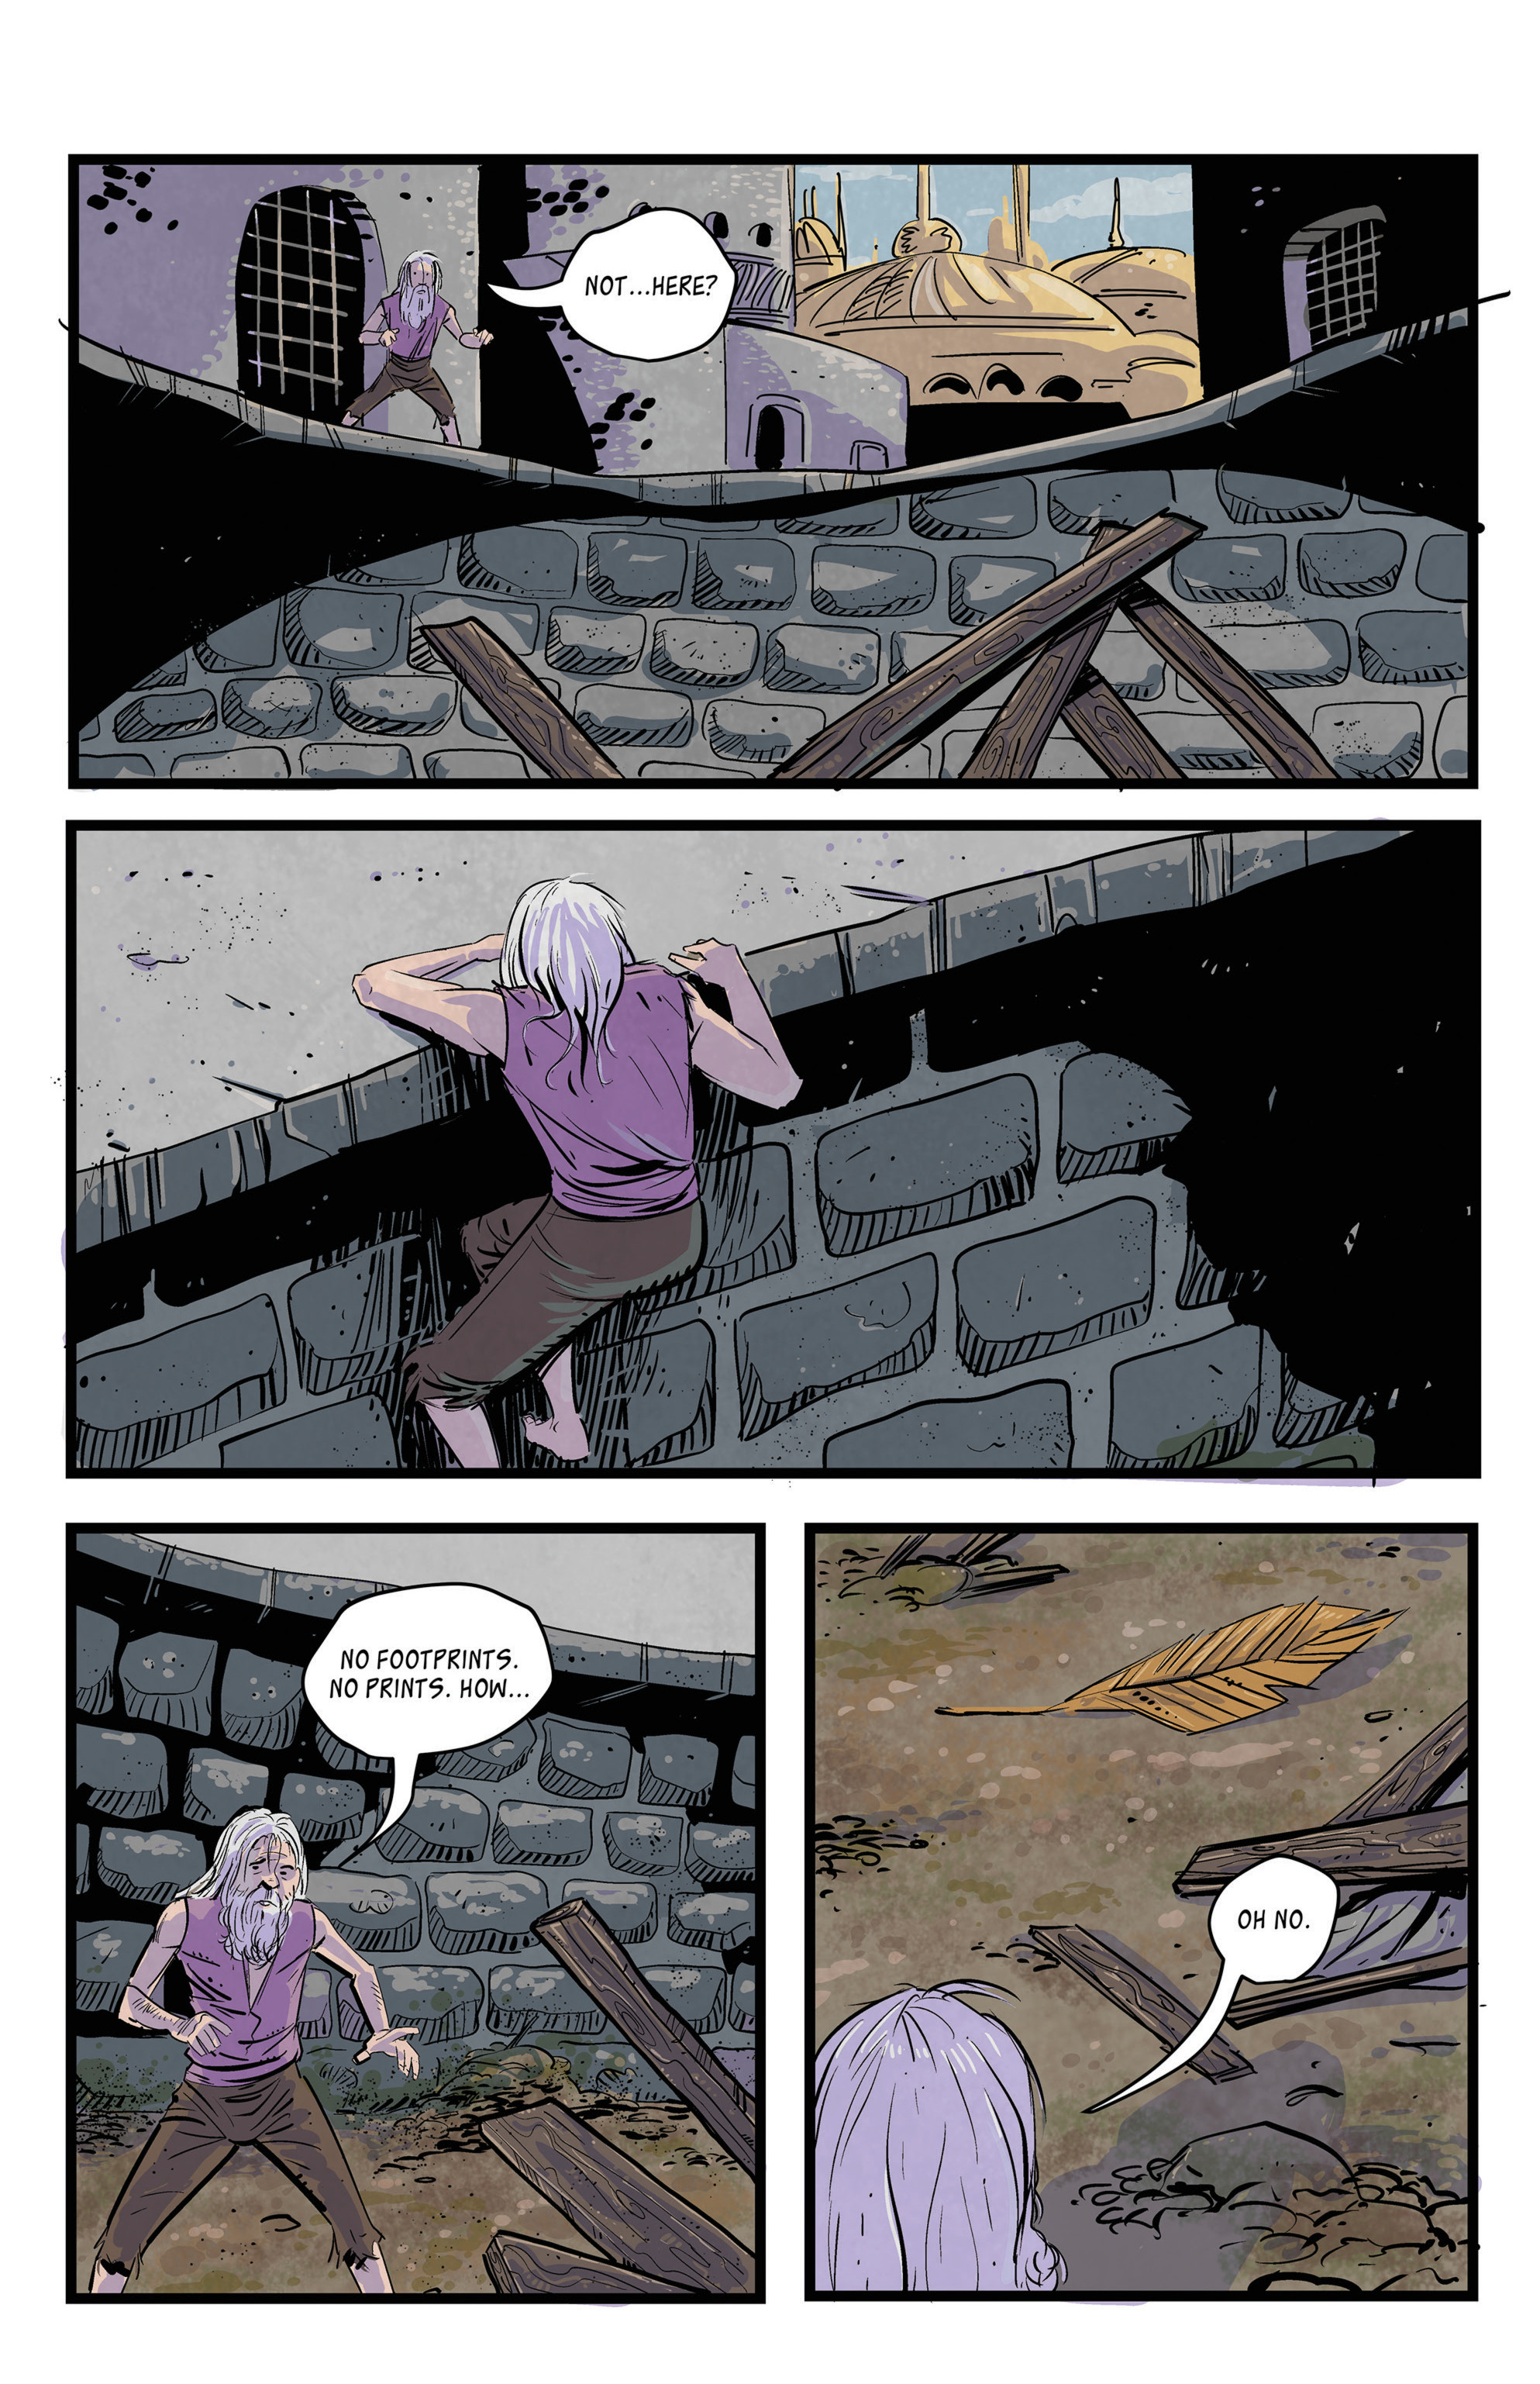 William the Last: Shadow of the Crown Vol. 3 (2019-): Chapter 5 - Page 5